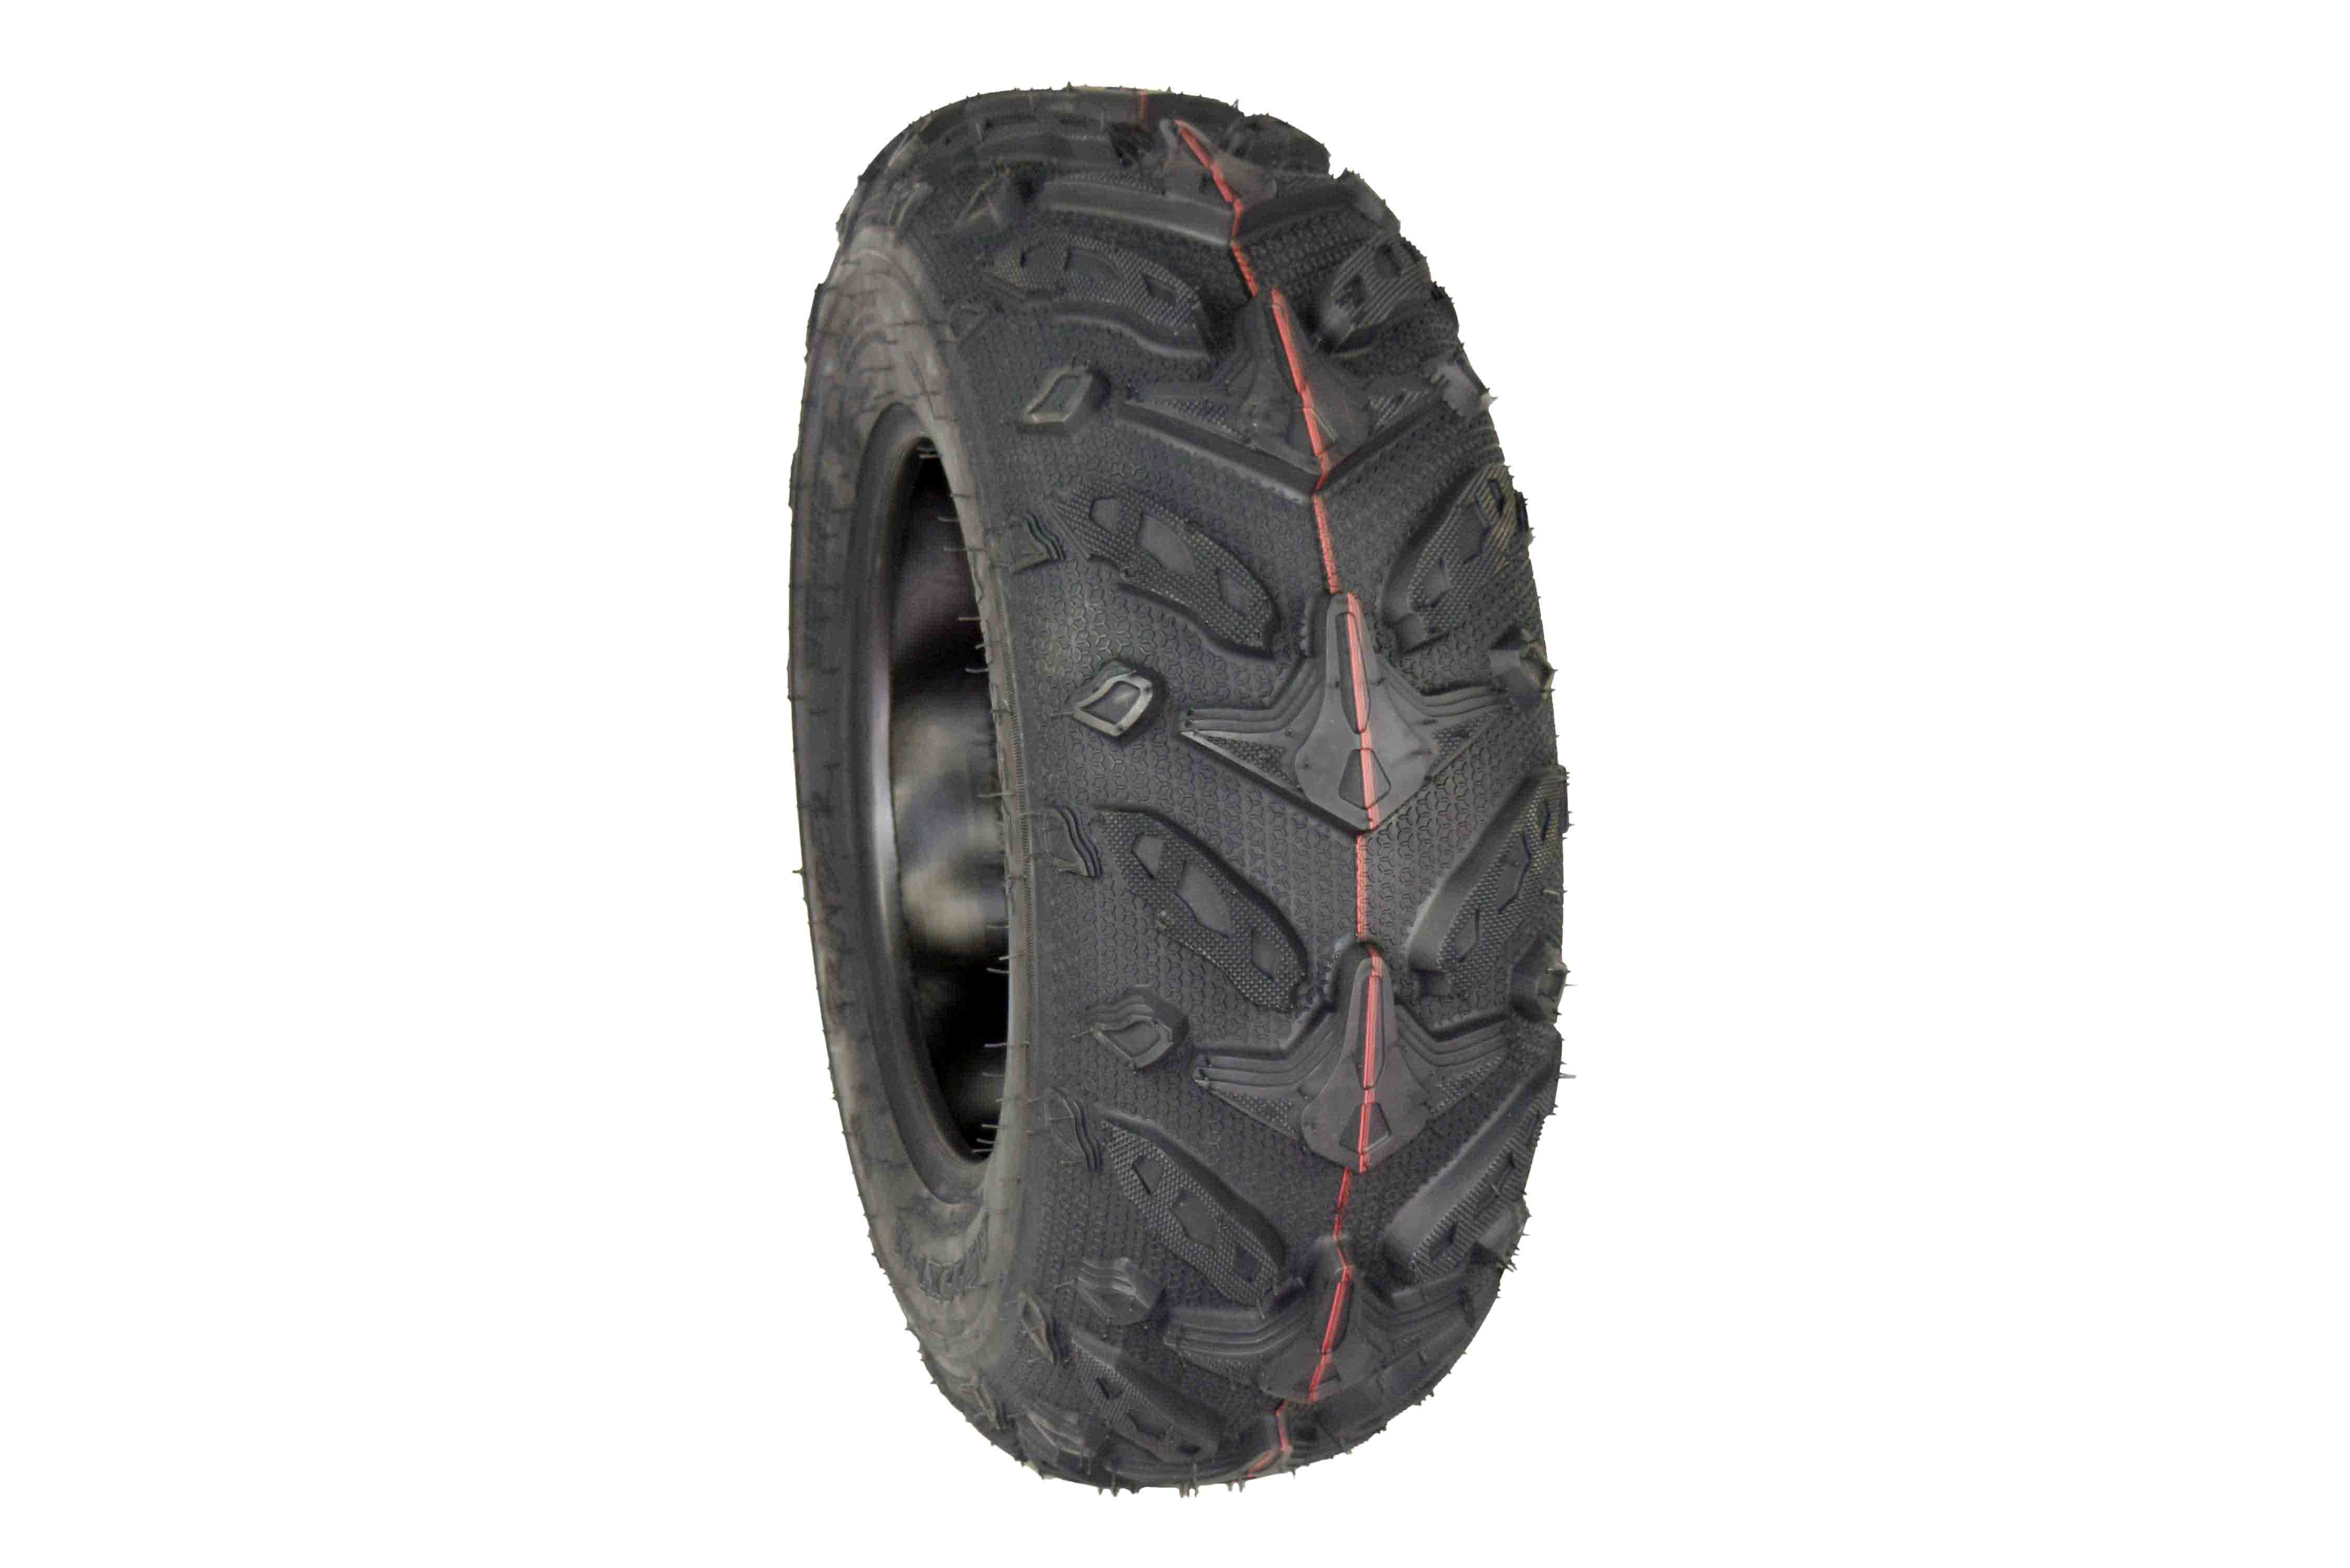 MASSFX-Grinder-22x7-11-Dual-Compound-6-PLY-Front-ATV-Tire-image-1